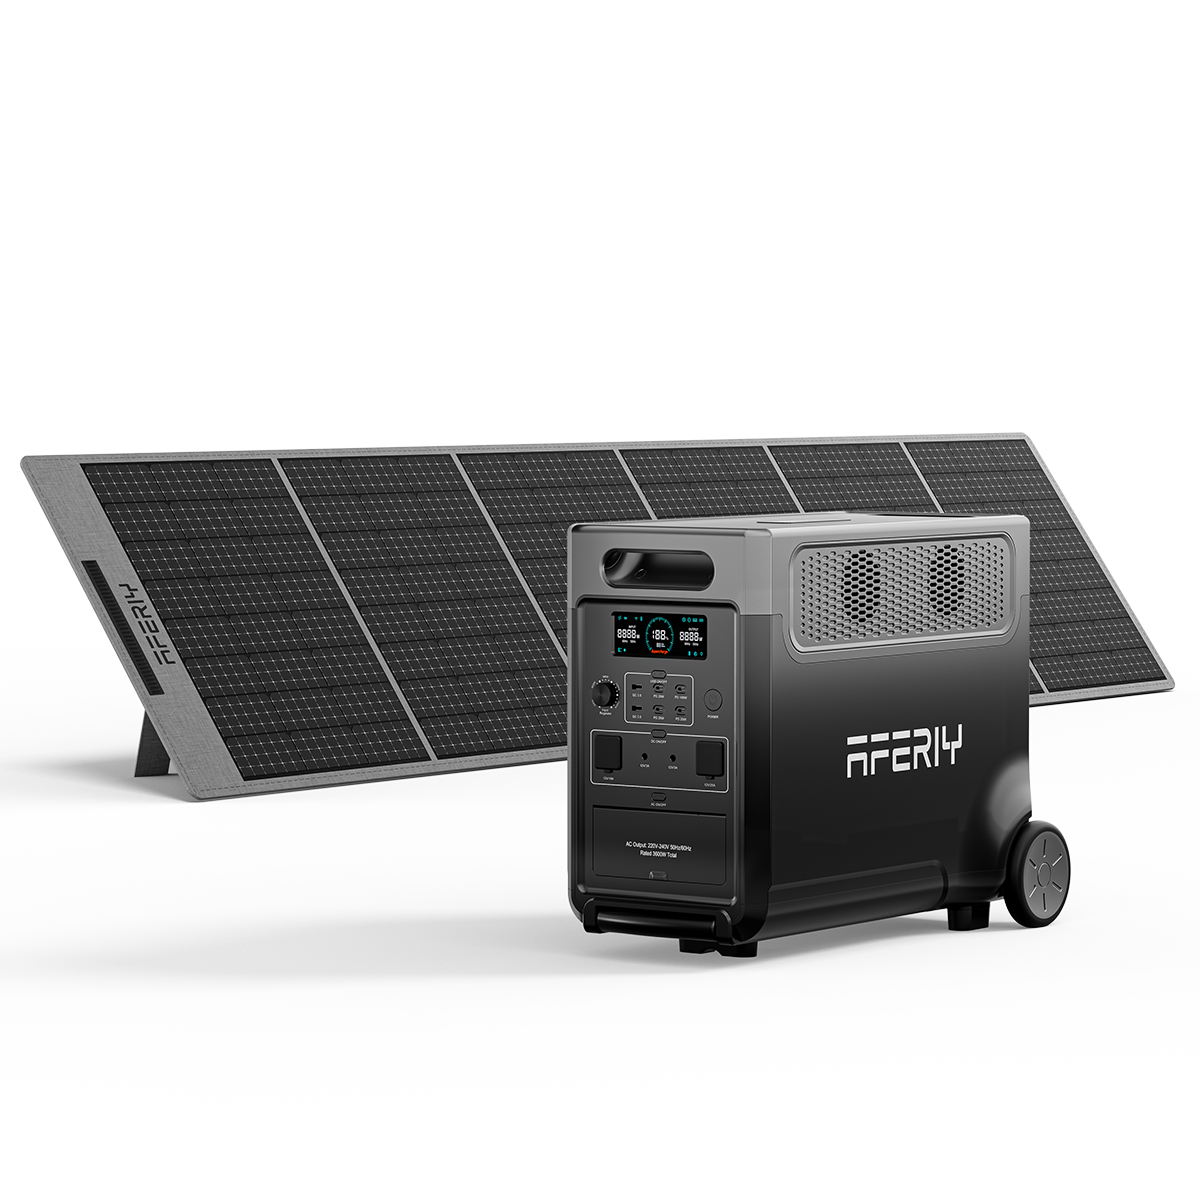 AFERIY Portable Power Station 1248Wh, 1200W Portable Power Station, 2x AC  230V Outlets, 4 Input Ways, 12 Outputs, LFP Battery, Solar Generator for